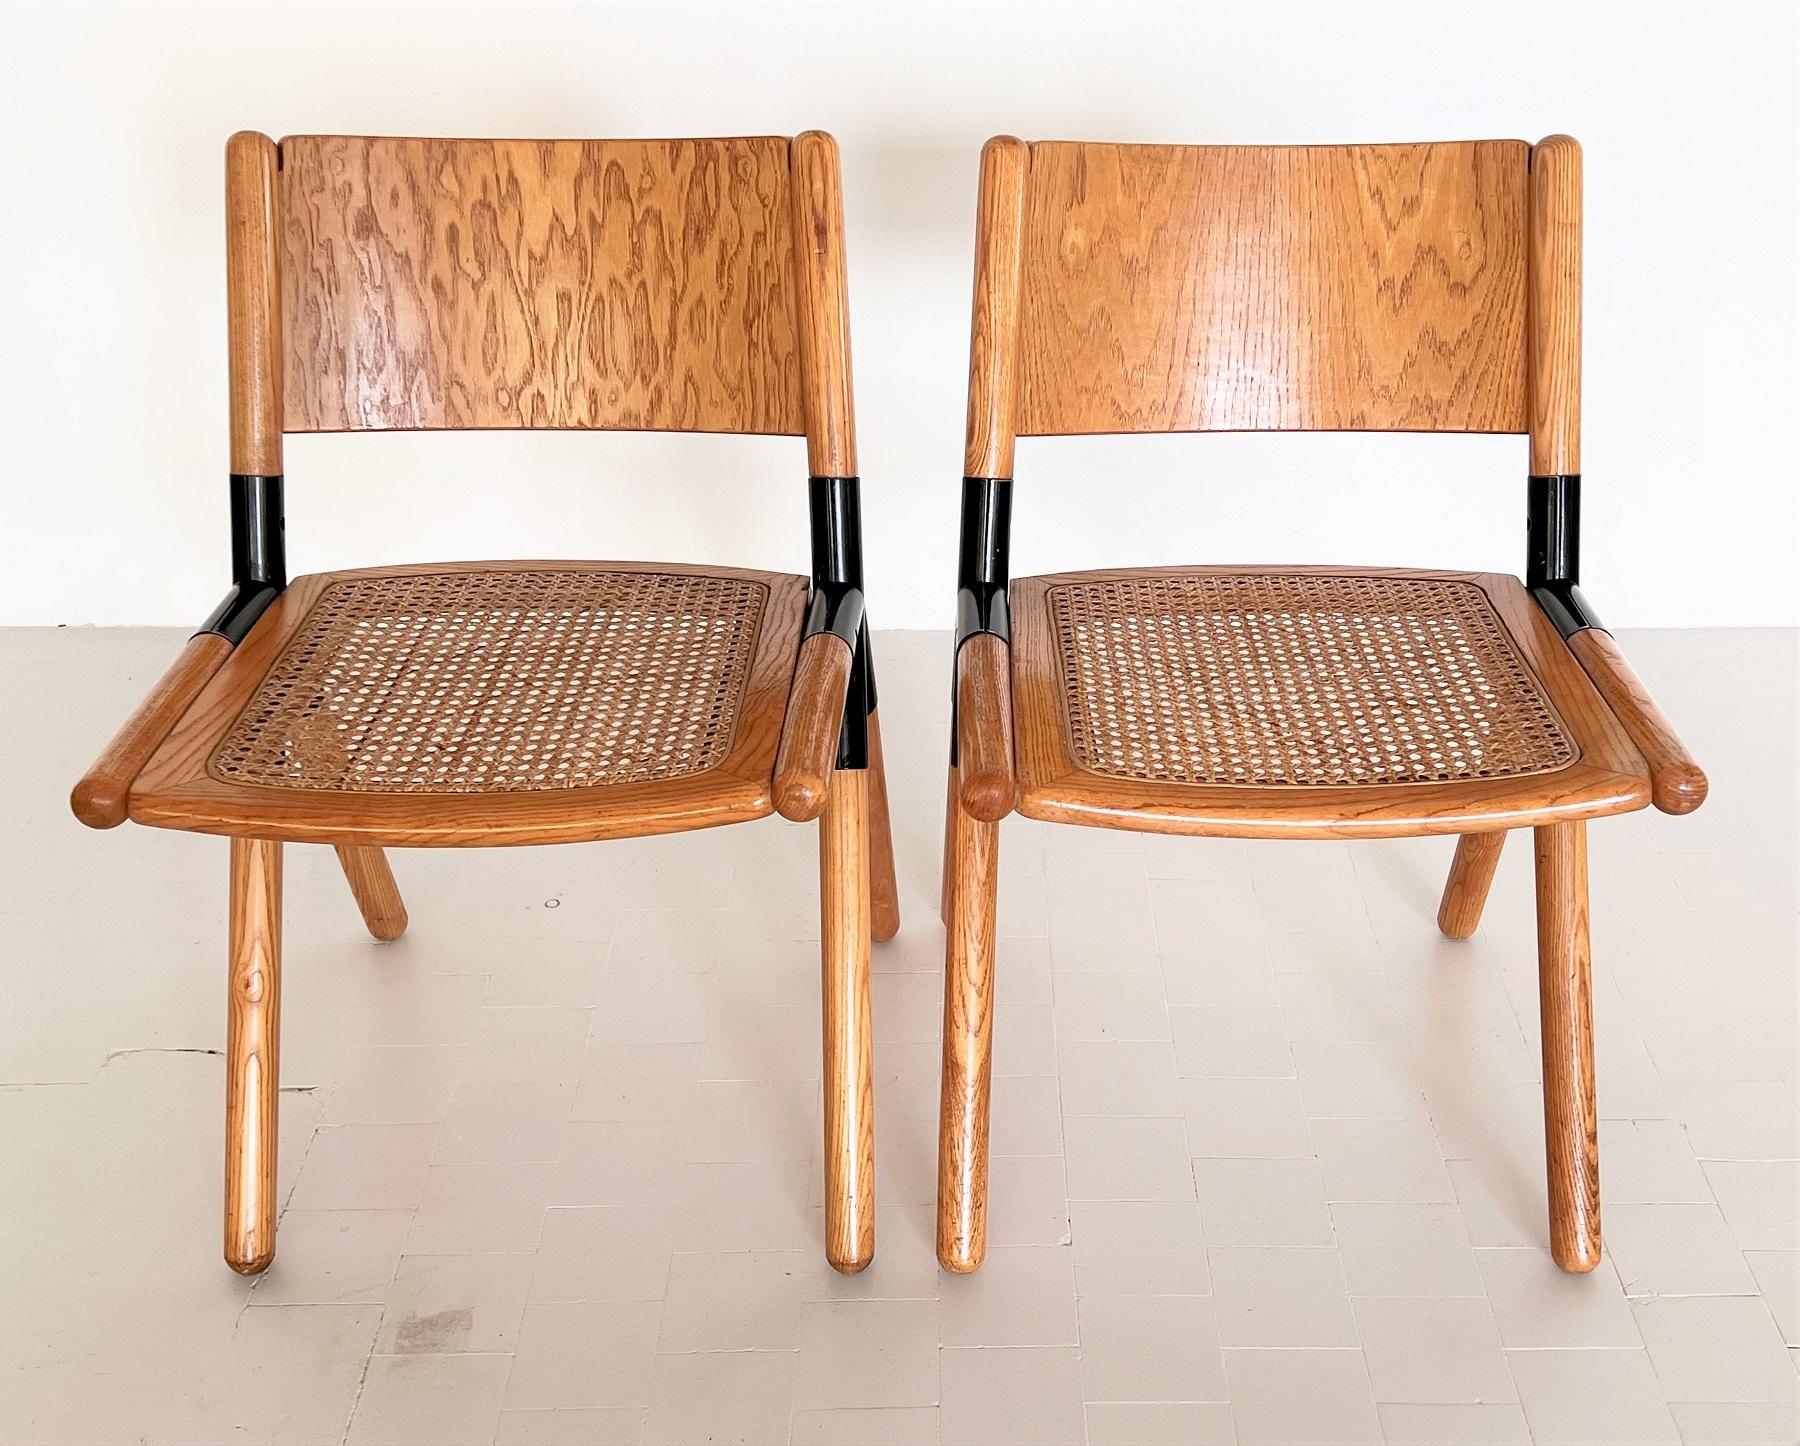 Woven Italian Midcentury Chairs in Oak and Rattan by Mauro Pasquinelli, 1975 For Sale